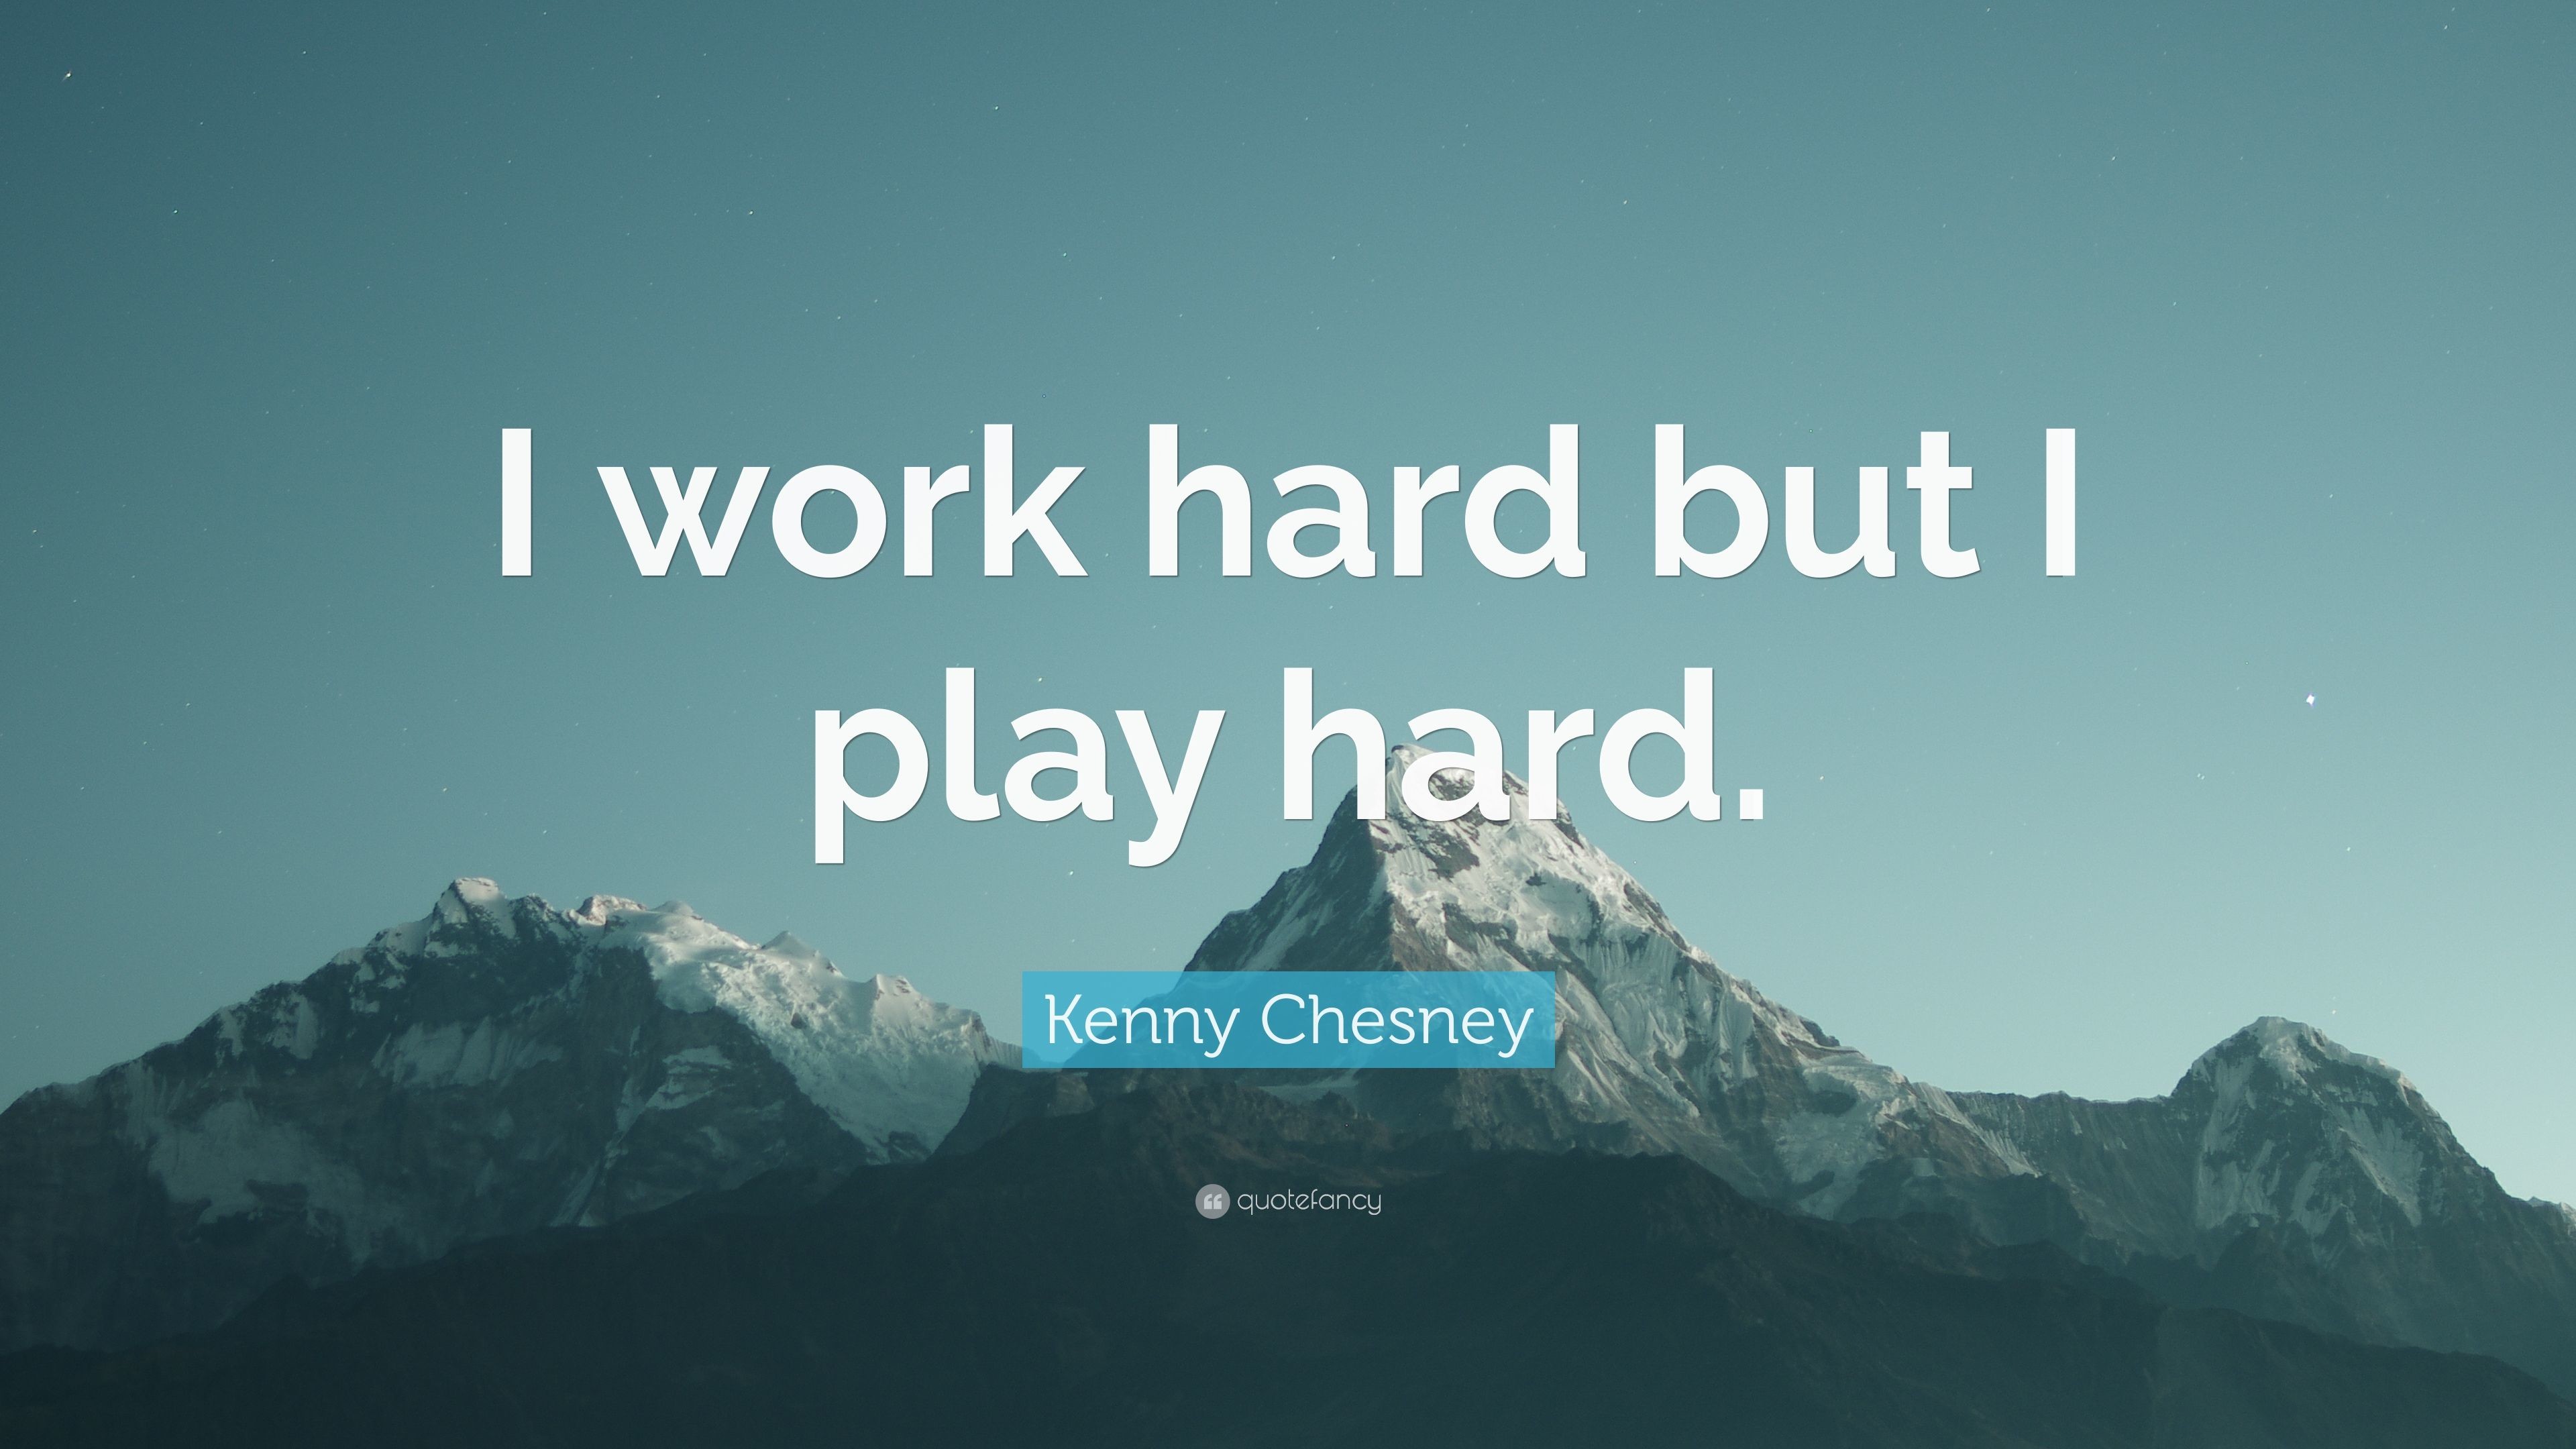 3840x2160 Kenny Chesney Quote: “I work hard but I play hard.”